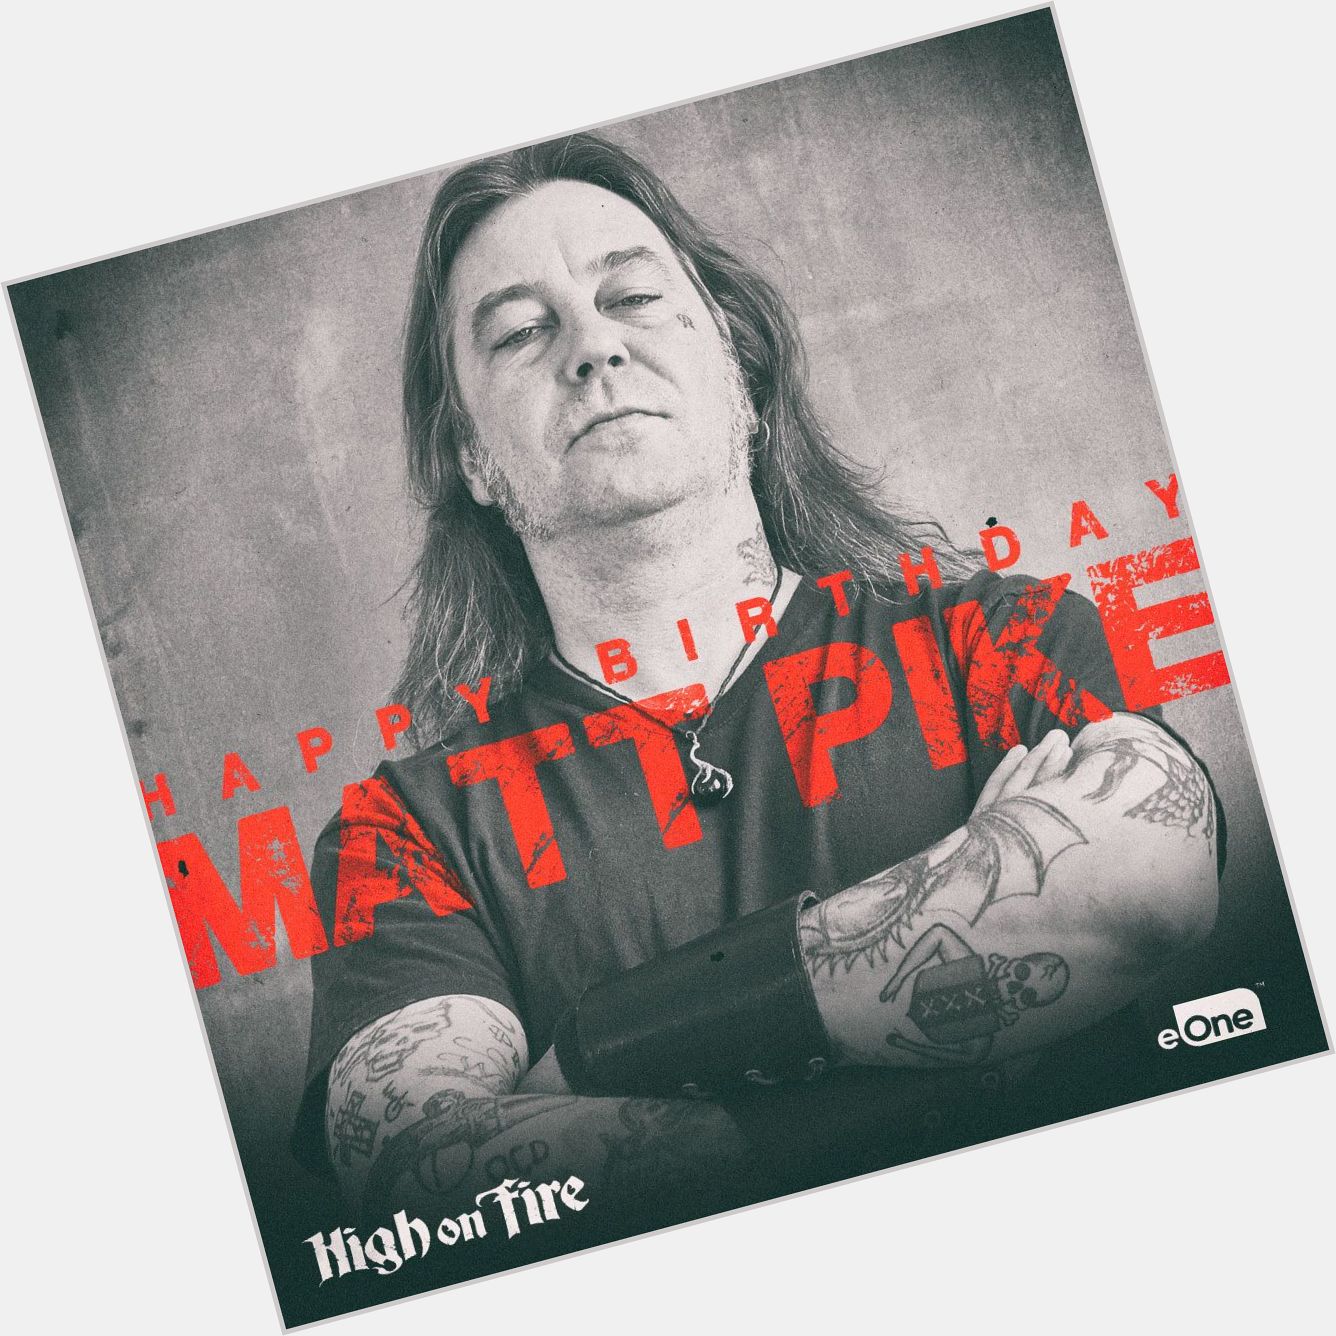 Happy Birthday to Matt Pike of Which track are you cranking to celebrate? 